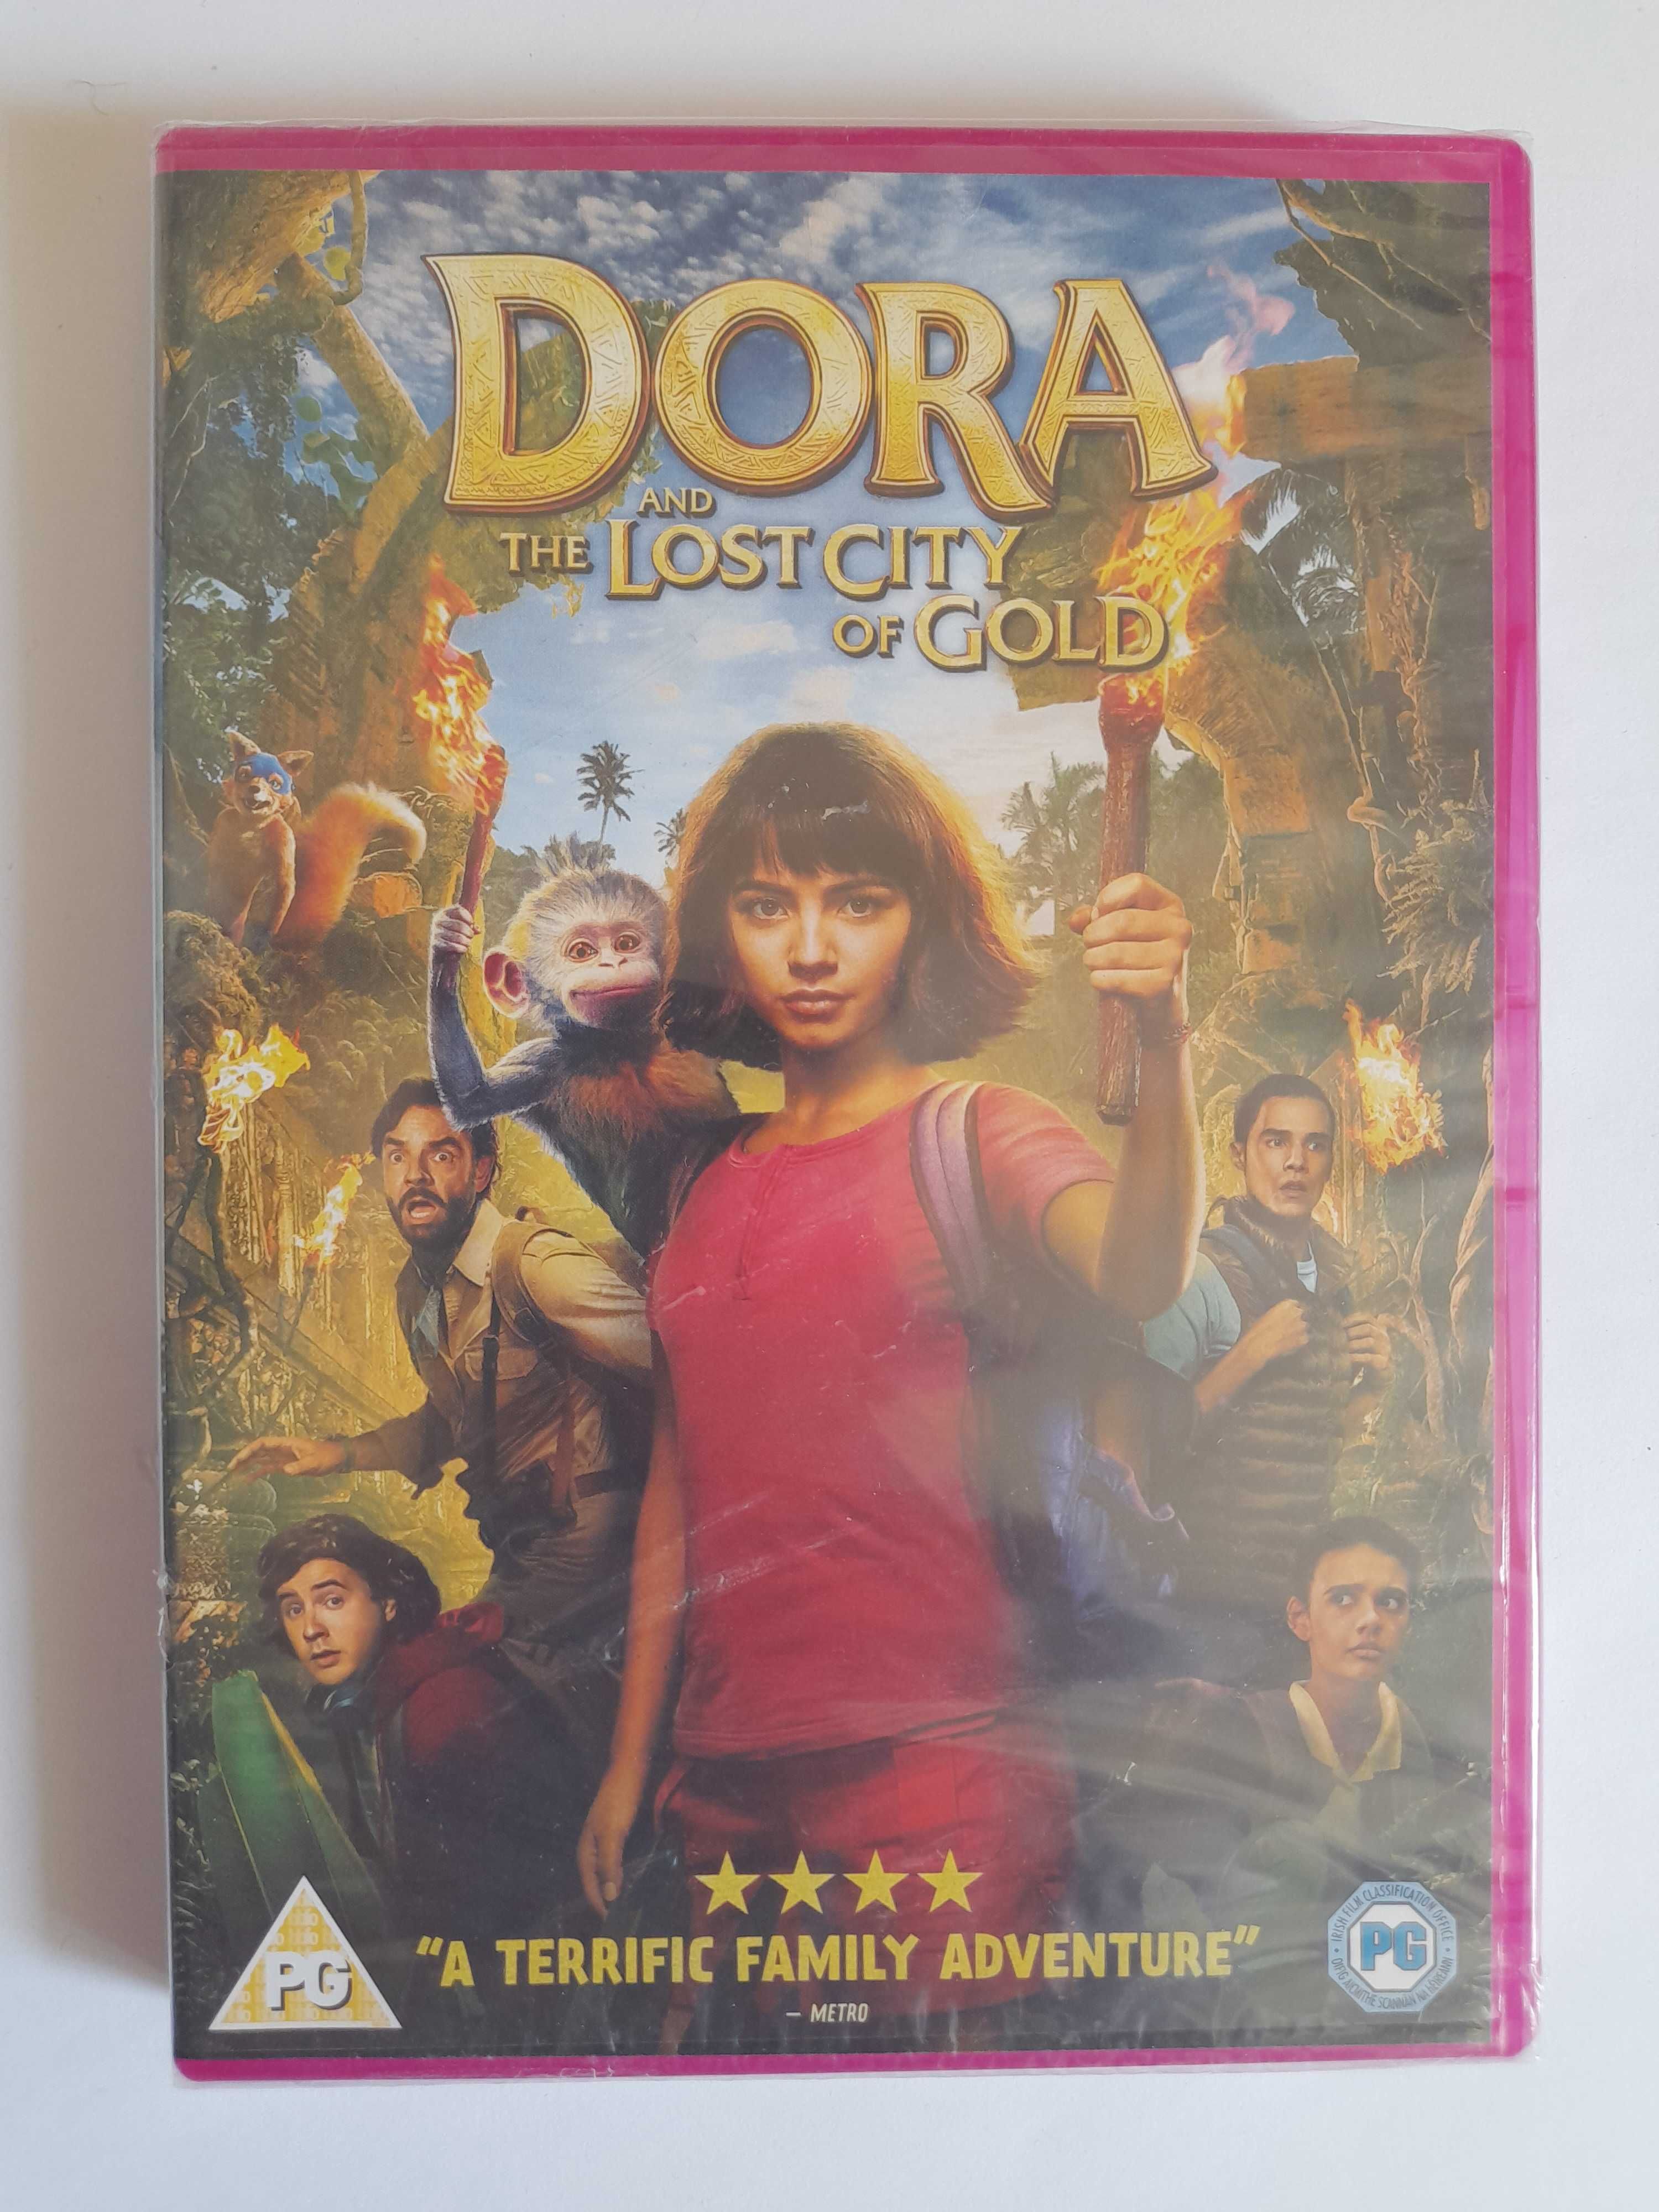 Film Dora and the Lost City of Gold płyta DVD